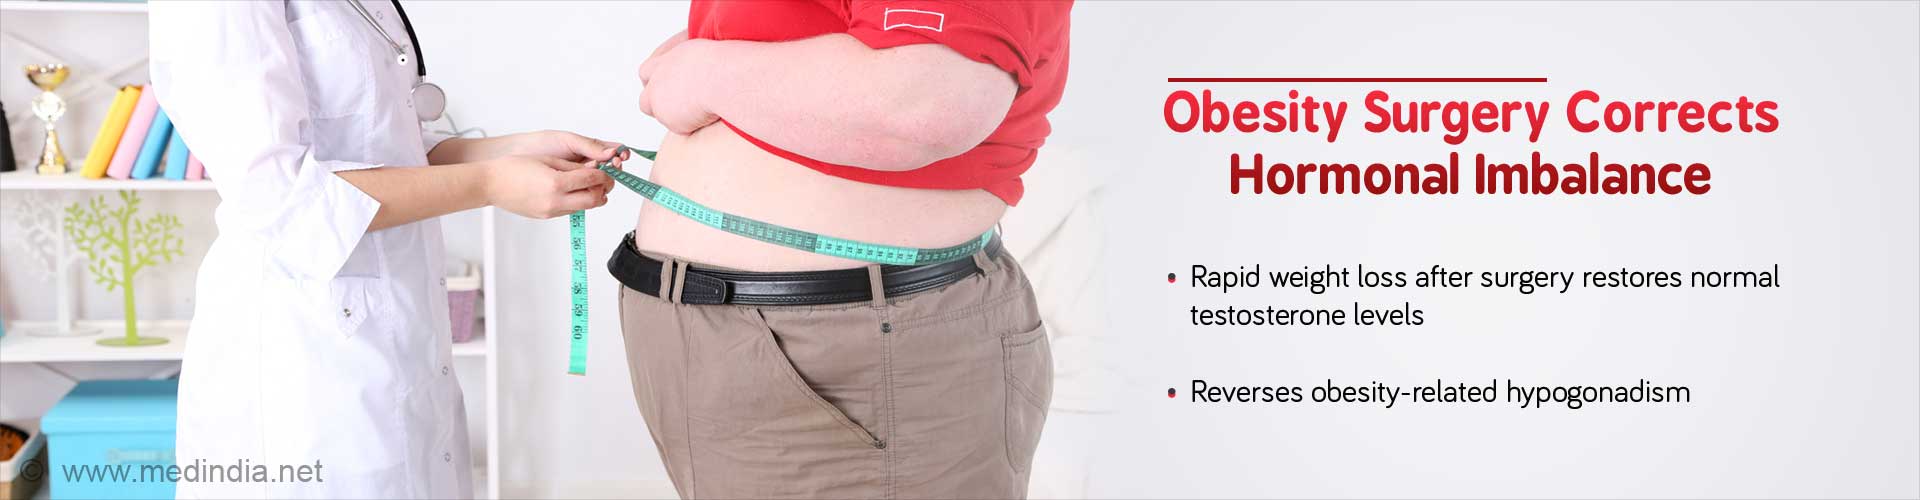 Obesity surgery corrects hormonal imbalance. Rapid weight loss after surgery restores normal testosterone levels. Reverses obesity-related hypogonadism. 